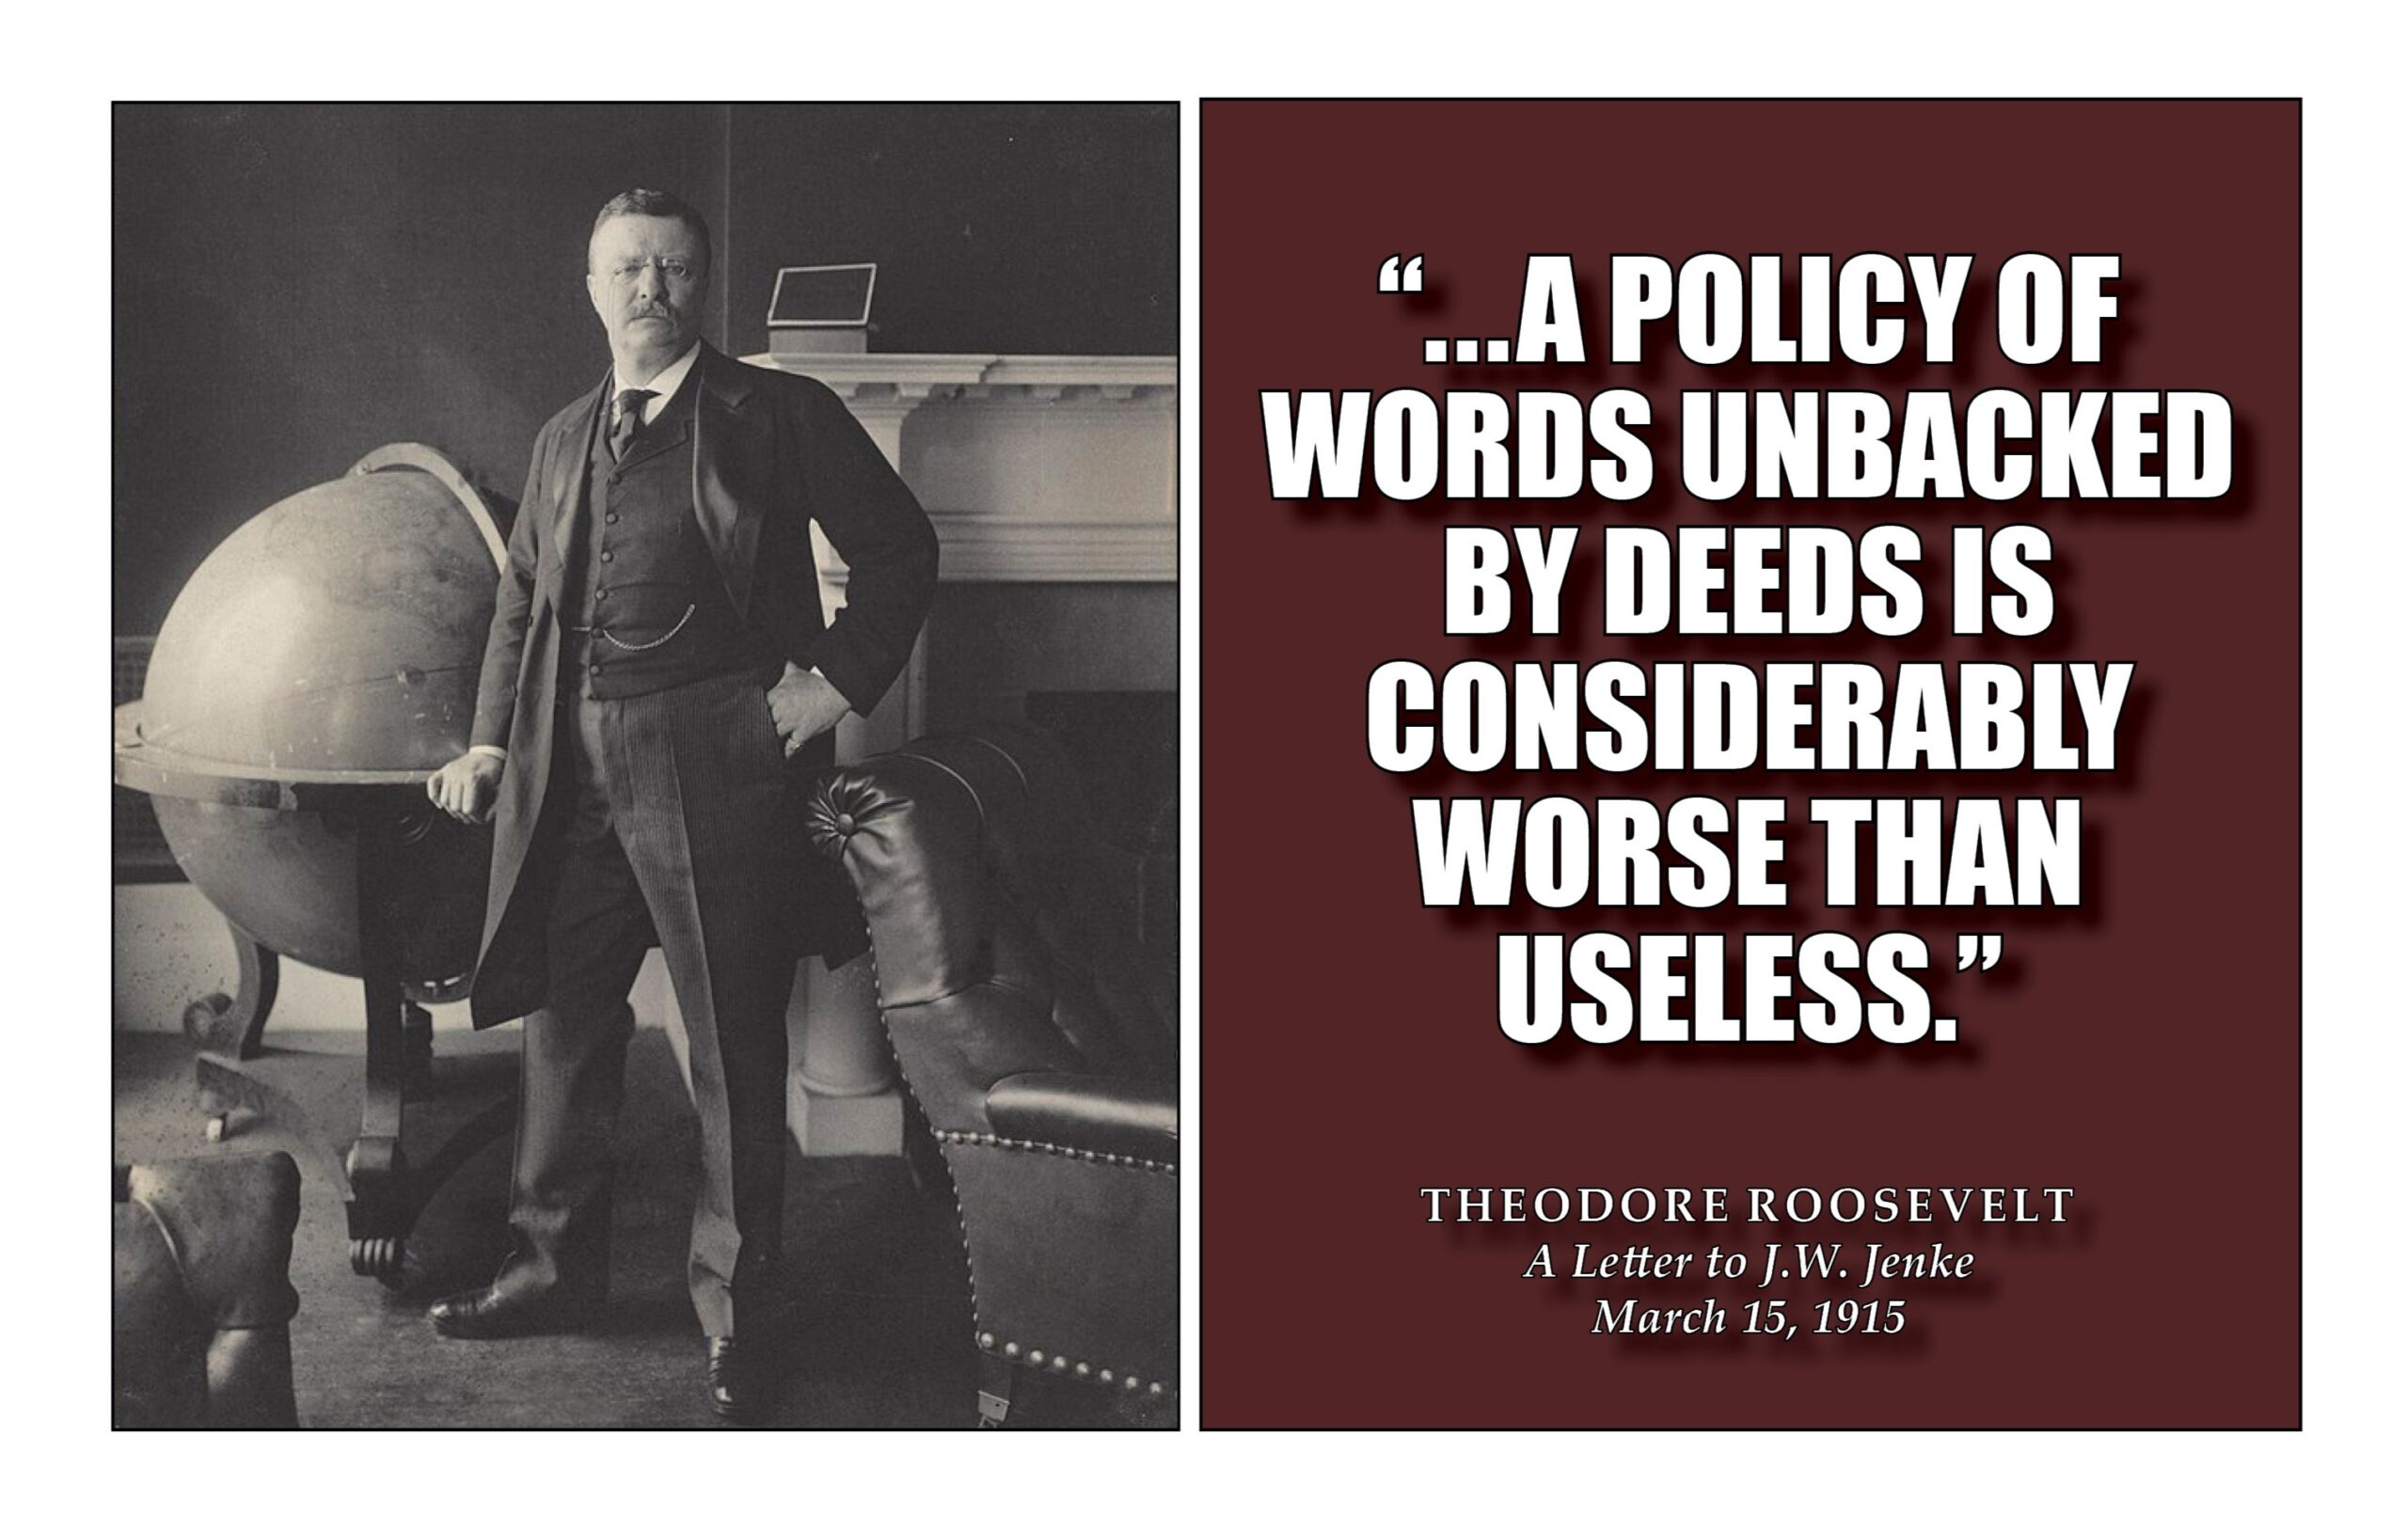 "... A policy of words unbacked by deeds is considerably worse than useless."